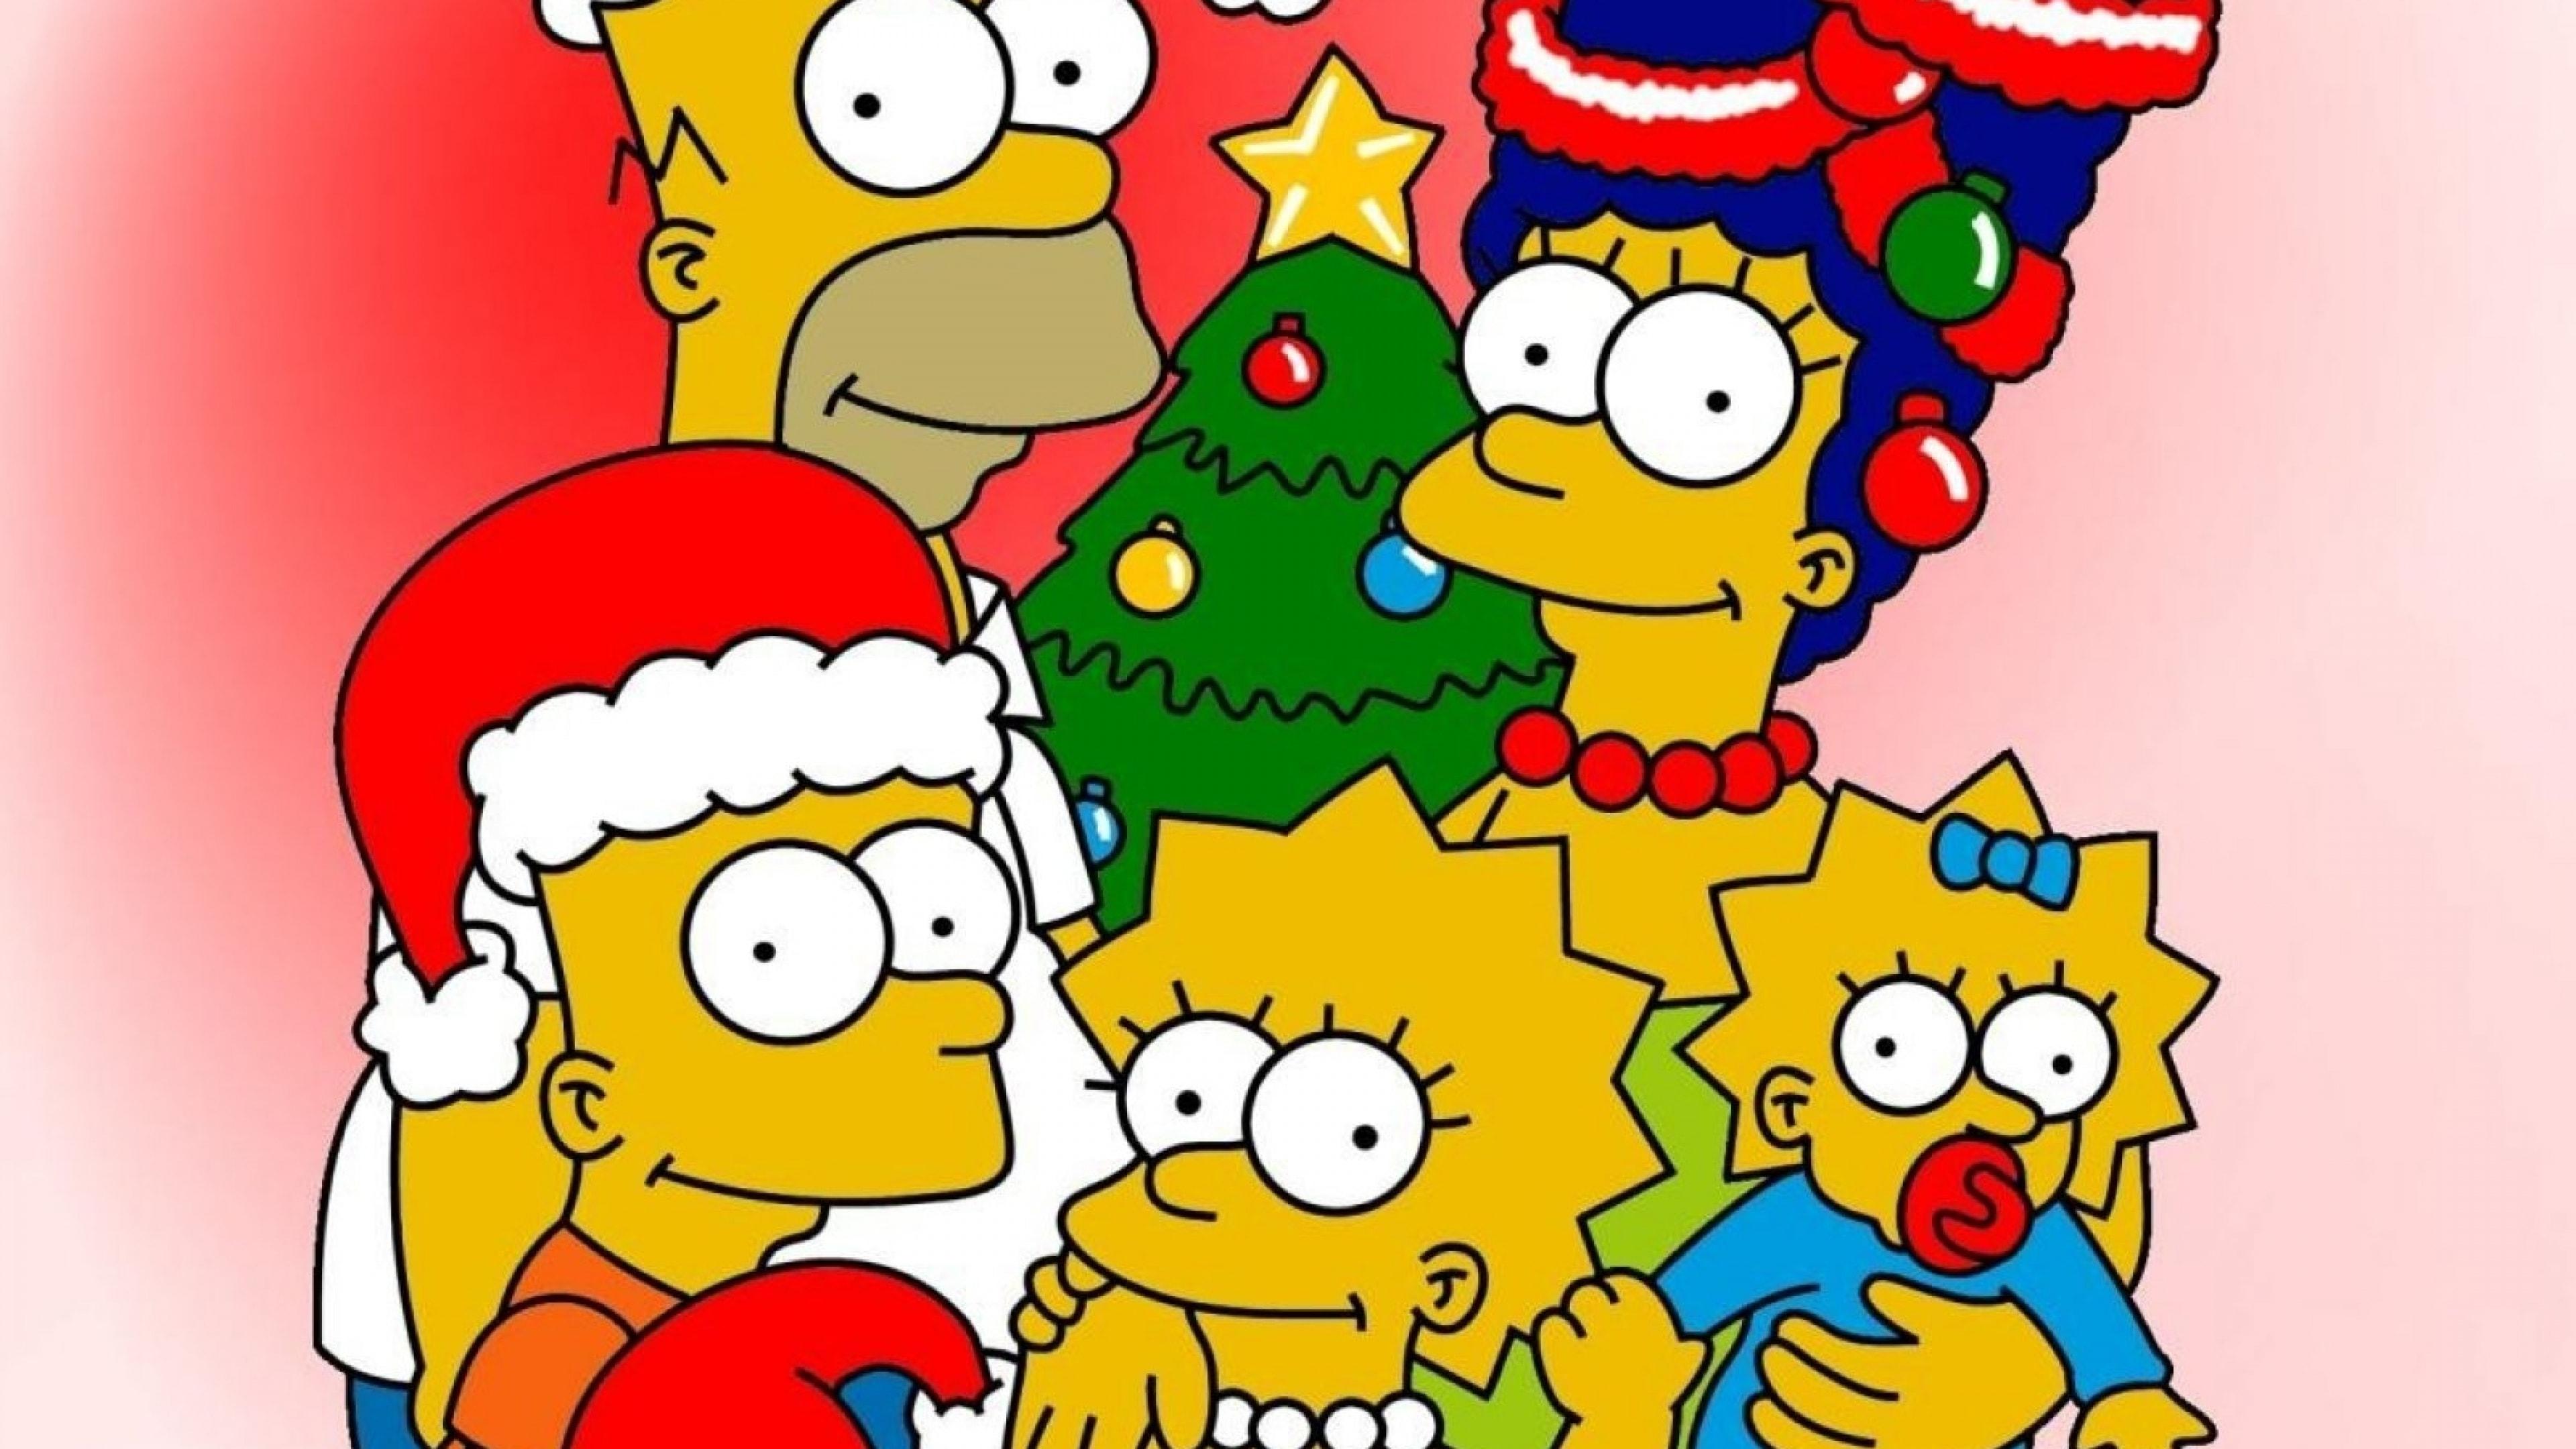 New Year Christmas Simpsons Wallpaper and Free